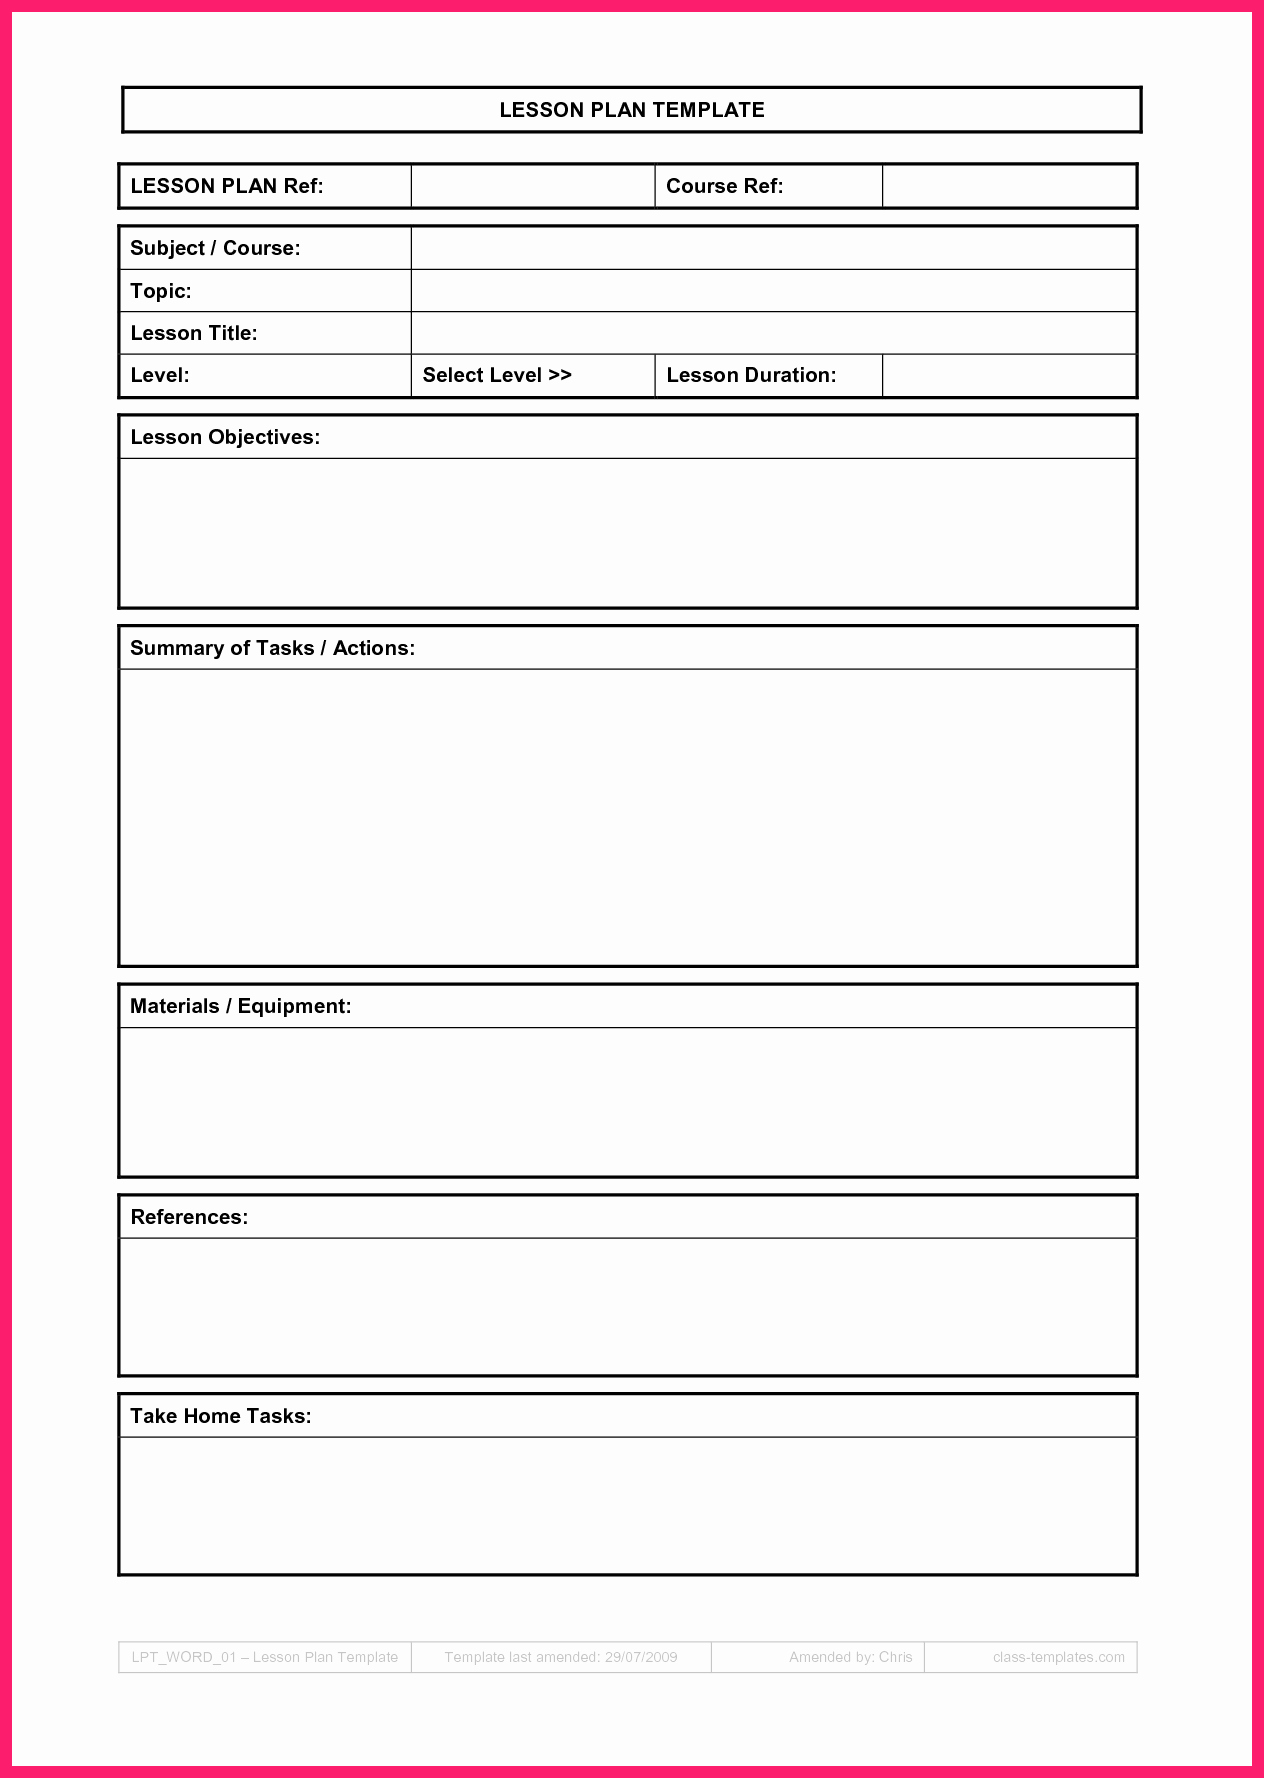 Blank Lesson Plan Template Free New Blank Lesson Plan Template